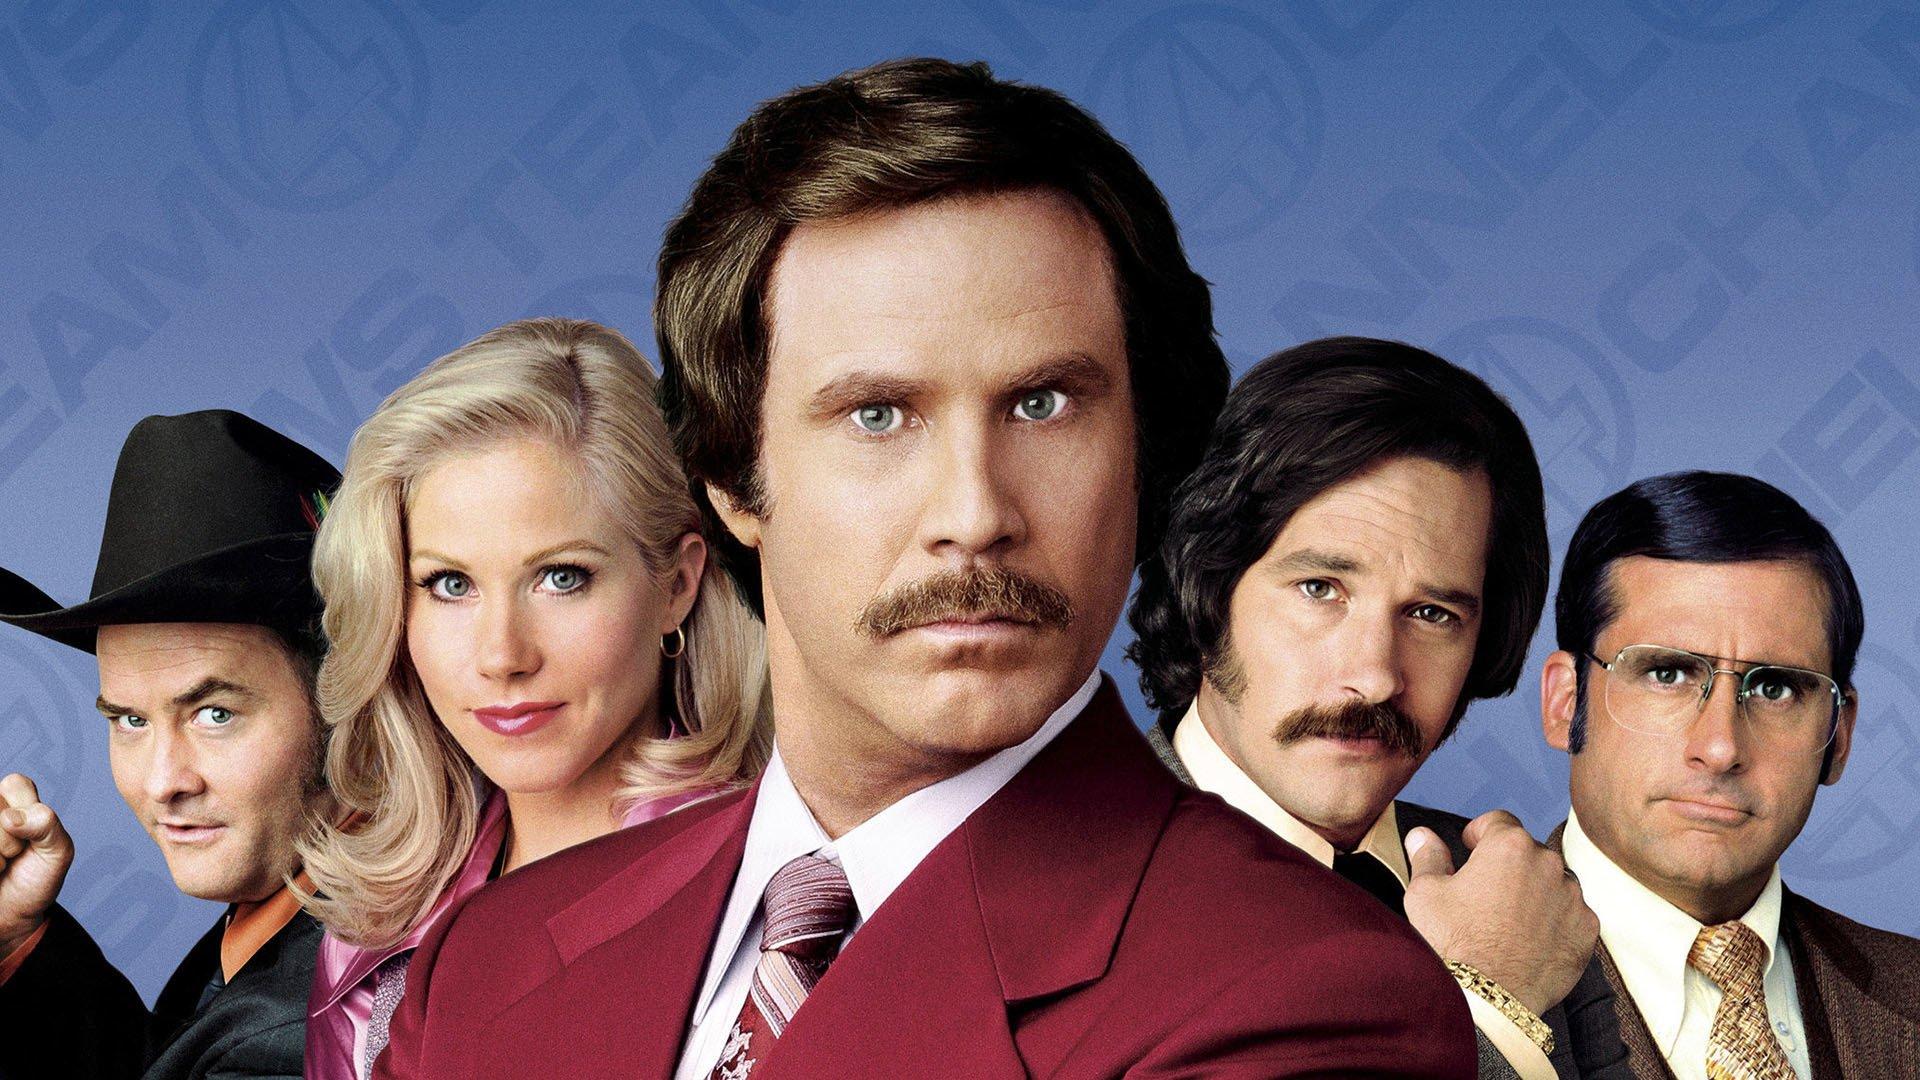 Anchorman: The Legend of Ron Burgundy HD Wallpaper. Background